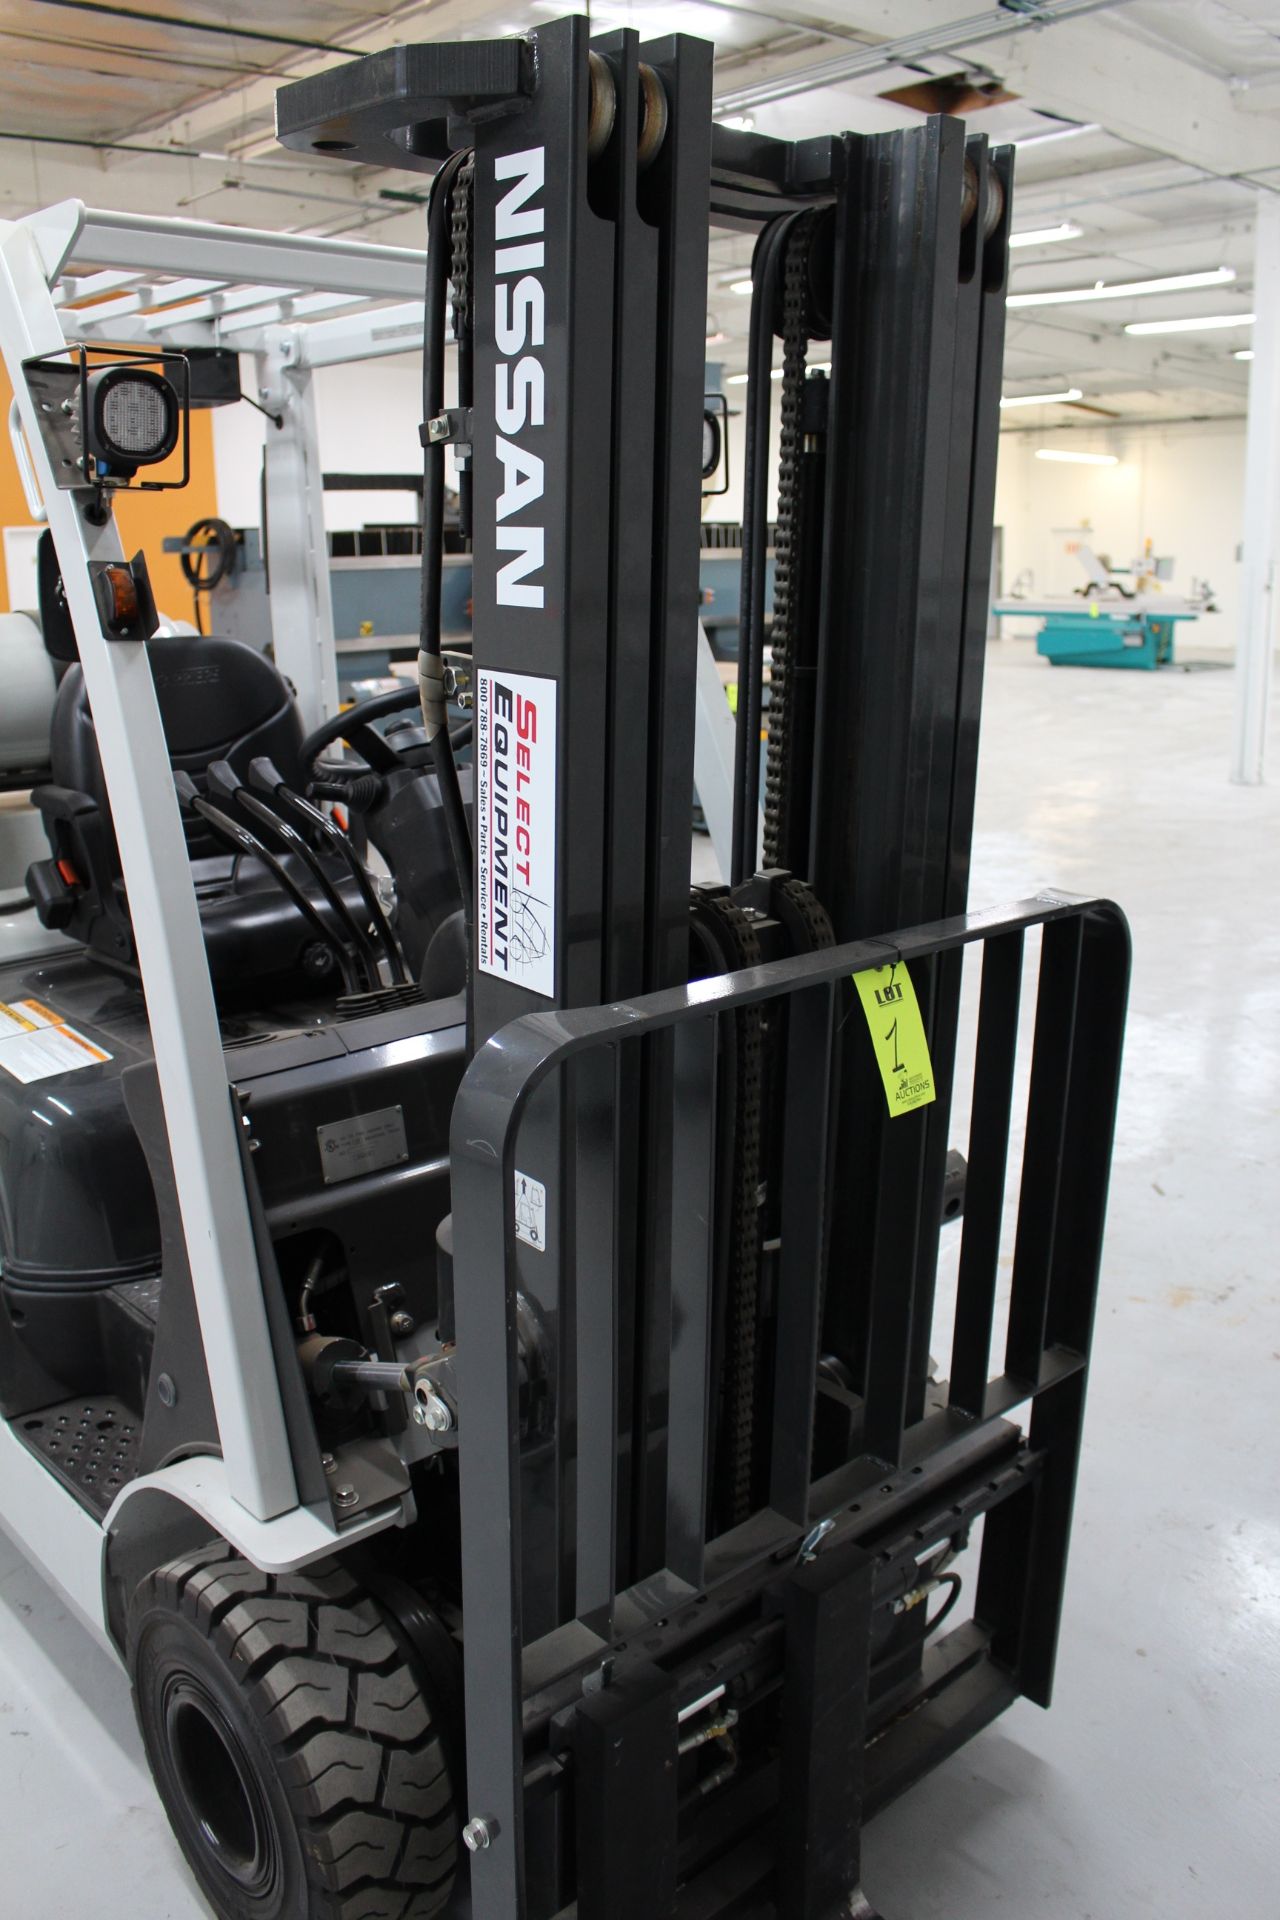 2015 NISSAN FORK LIFT MODEL MAP1F2A25LV, 5000 LBS CAP., PROPANE, SOLID TIRES, SIDE SHIFT, 3 STAGE, - Image 2 of 16